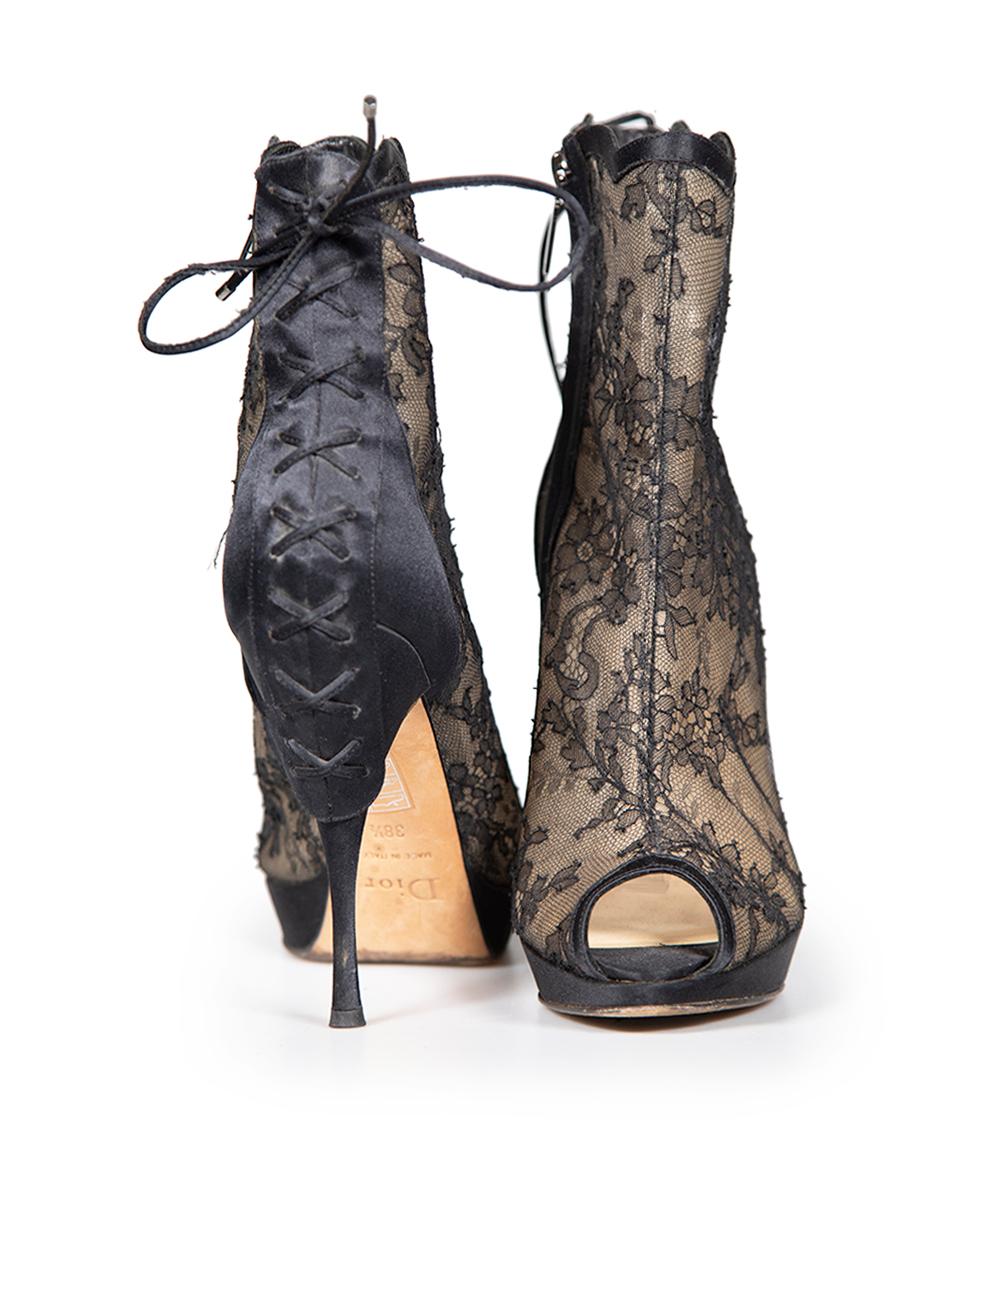 Dior Black Floral Lace Peep Toe Ankle Heels Size IT 38.5 In Good Condition For Sale In London, GB